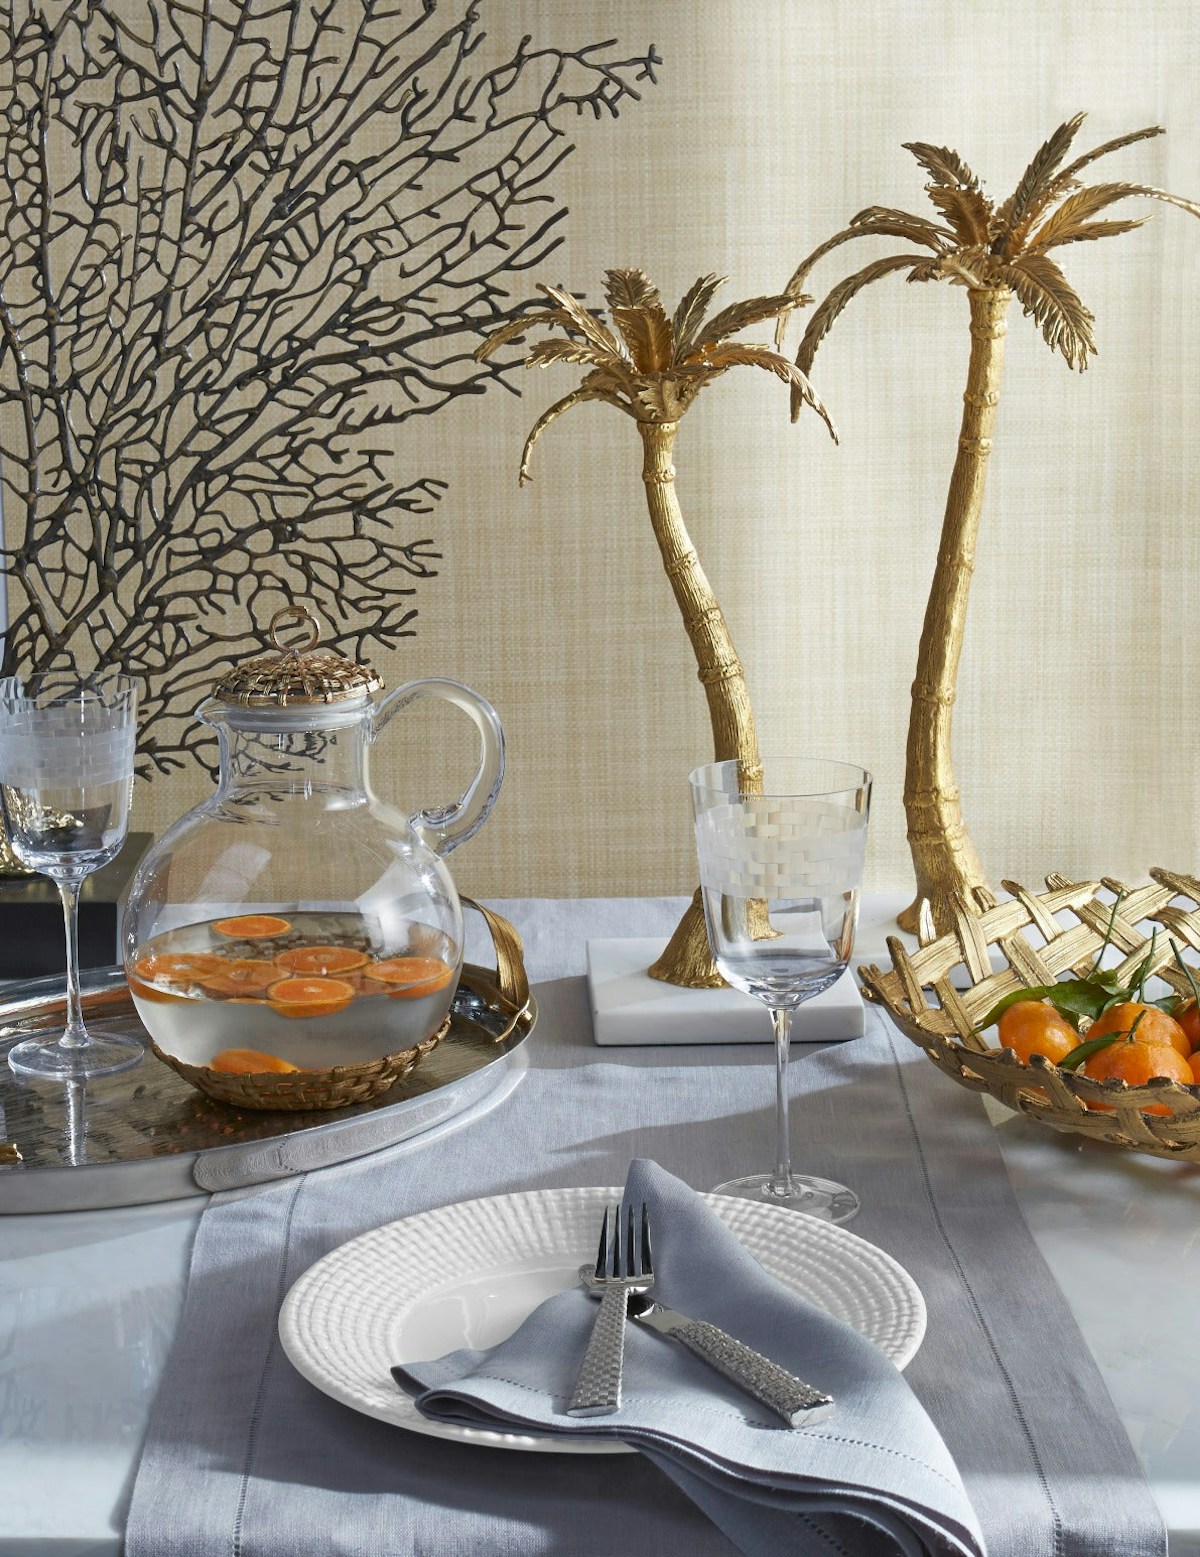 Tropical Tableware - How to Decorate with Tropical Prints in your Home Interior - LuxDeco.com